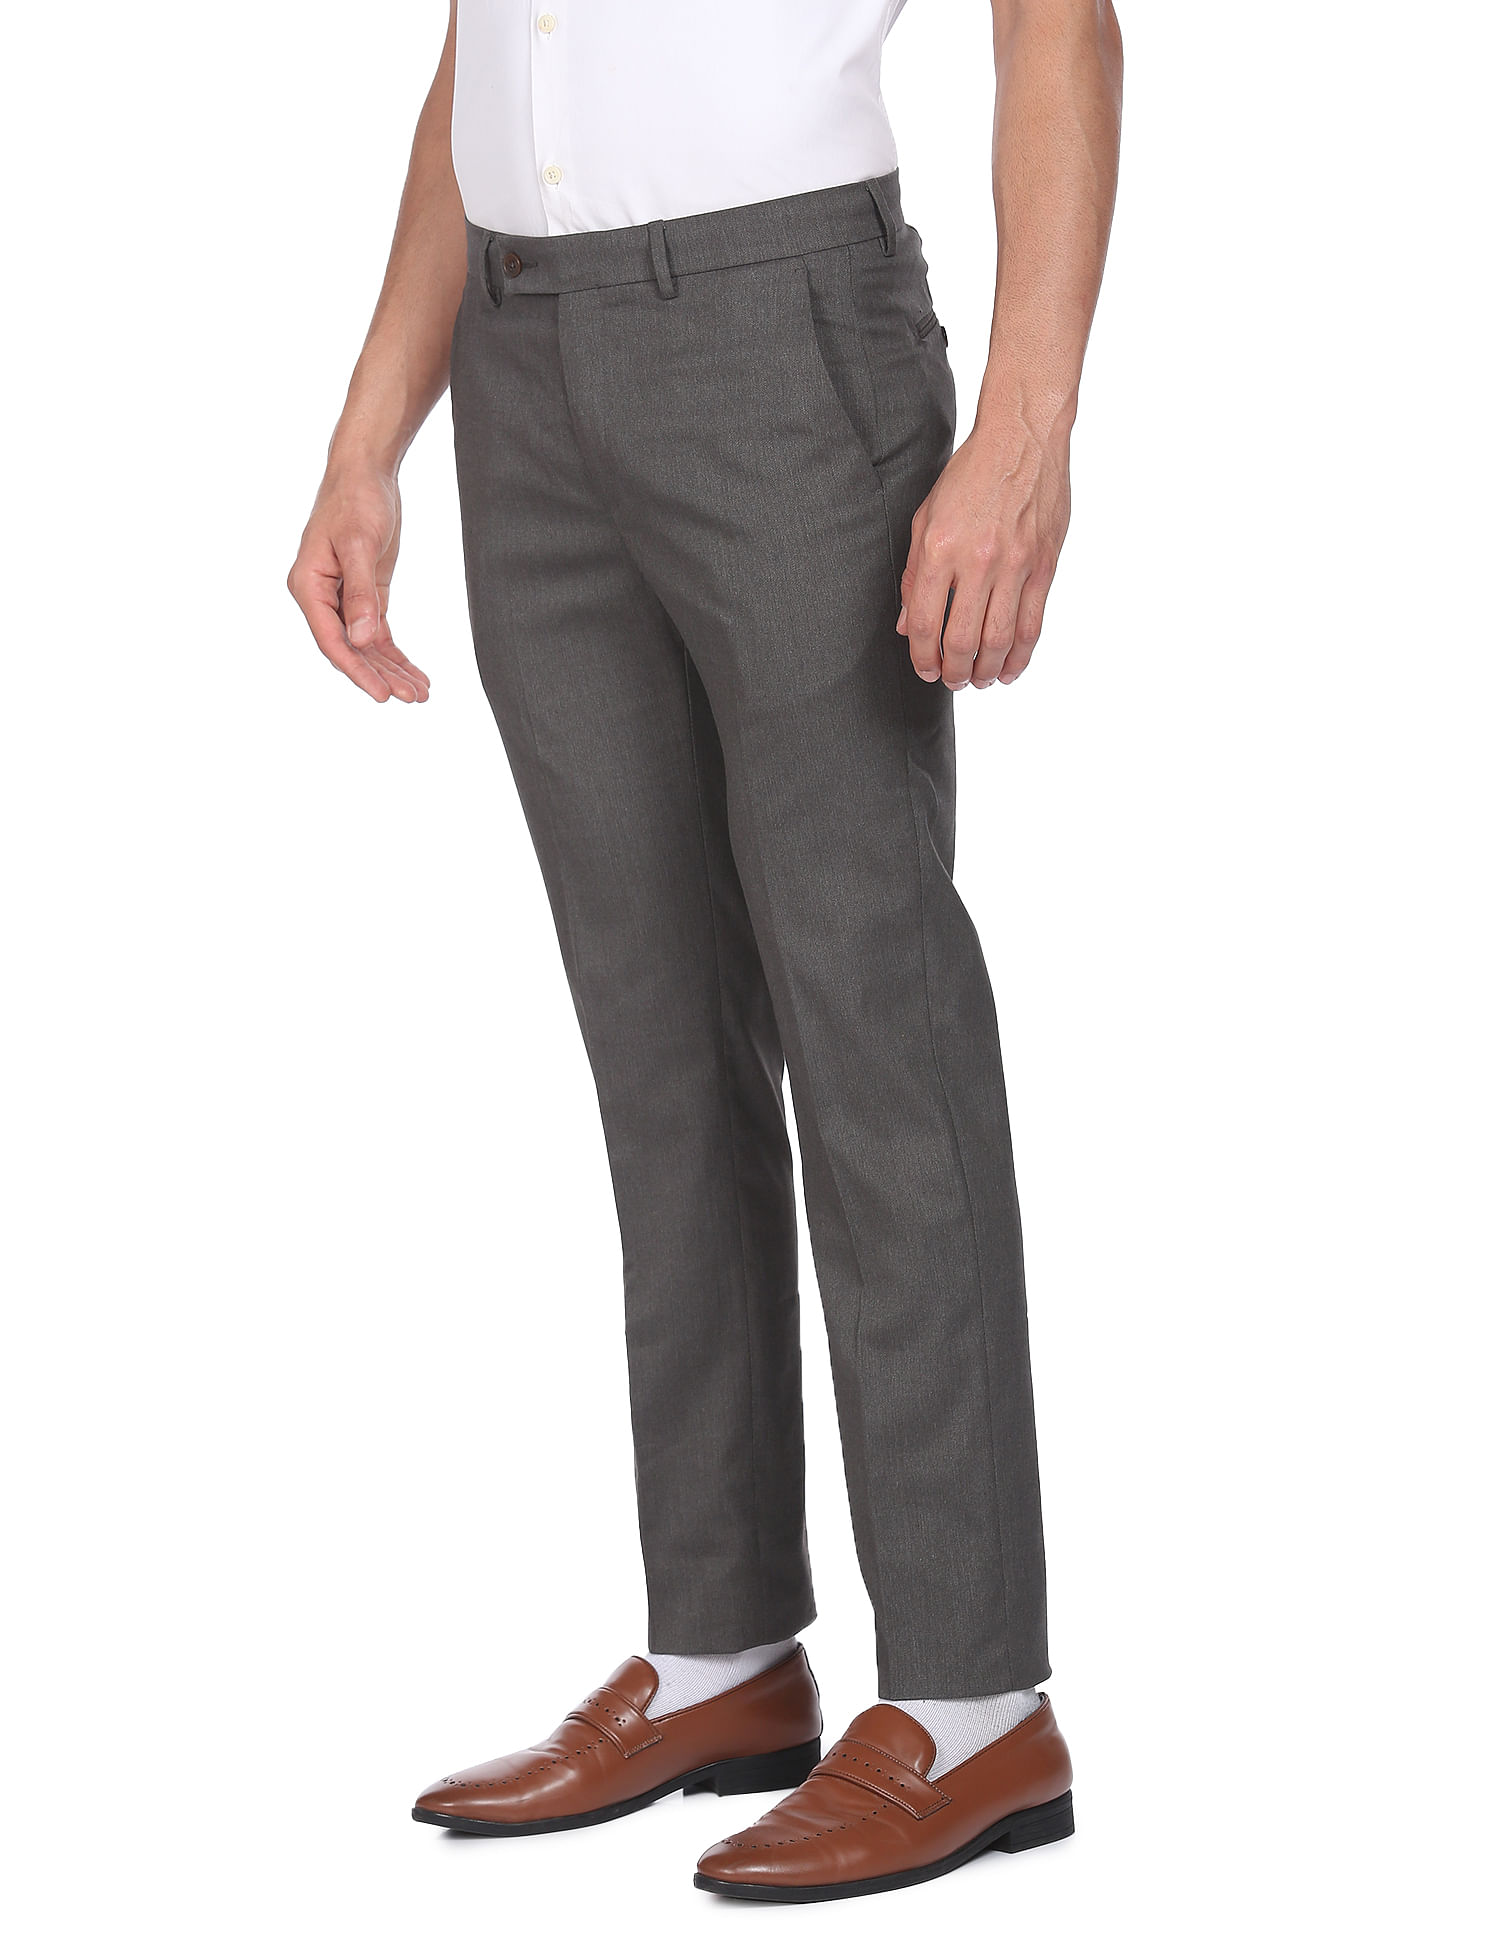 Buy ARROW Grey Mens Flat Front Regular Fit Trousers  Shoppers Stop